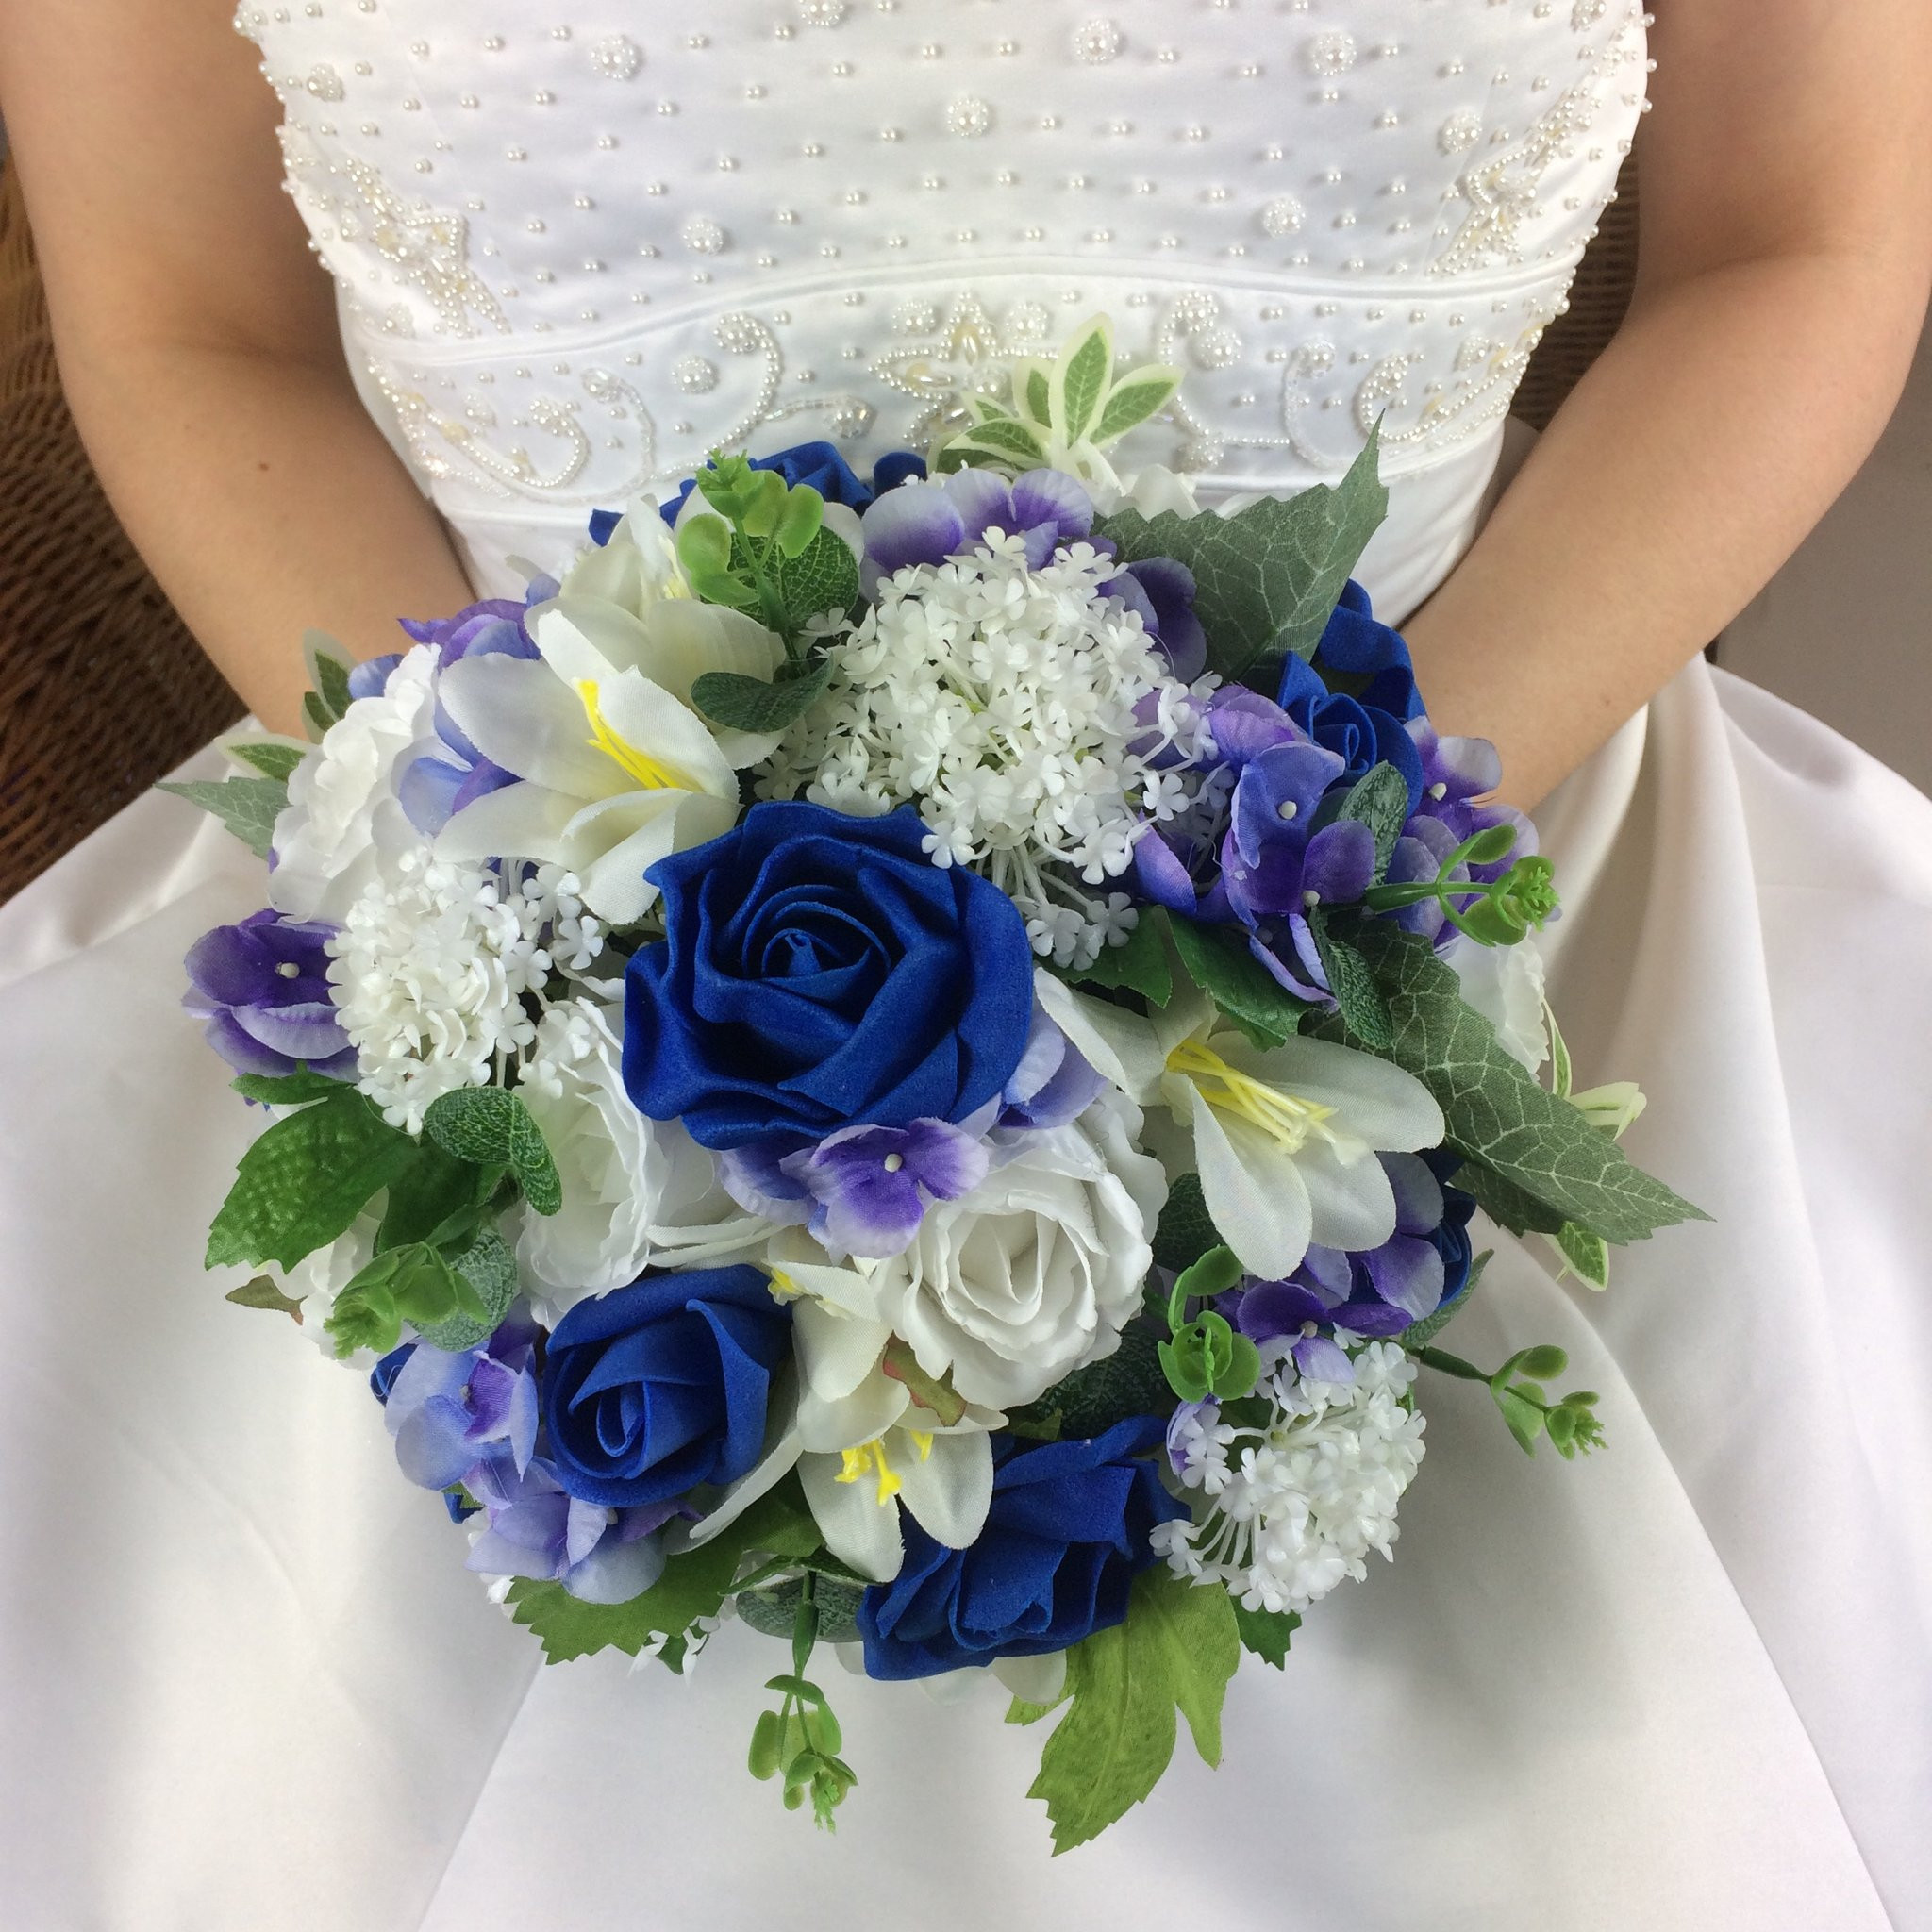 Royal Blue Flowers For Wedding
 WEDDING BOUQUET of artificial silk royal blue and white